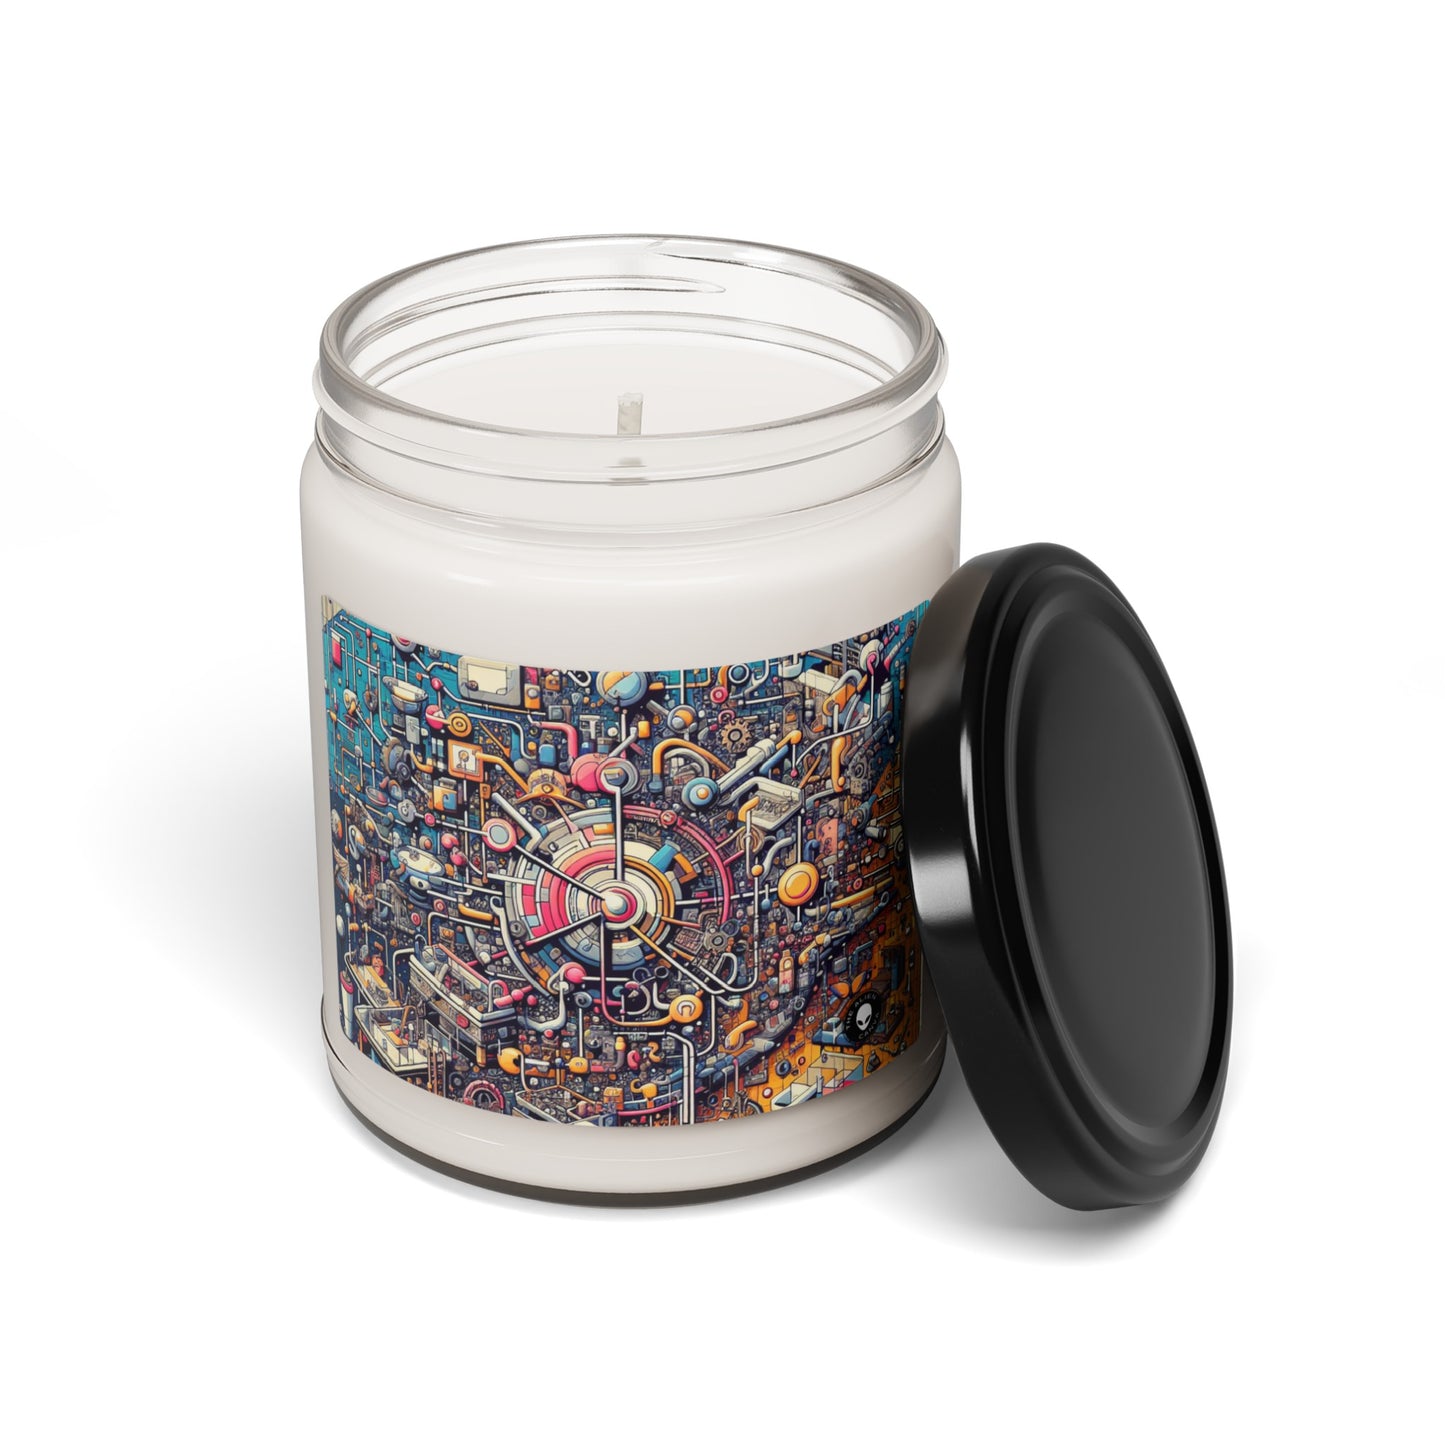 "Connection Points: Exploring Human Interactions in Public Spaces" - The Alien Scented Soy Candle 9oz Relational Art